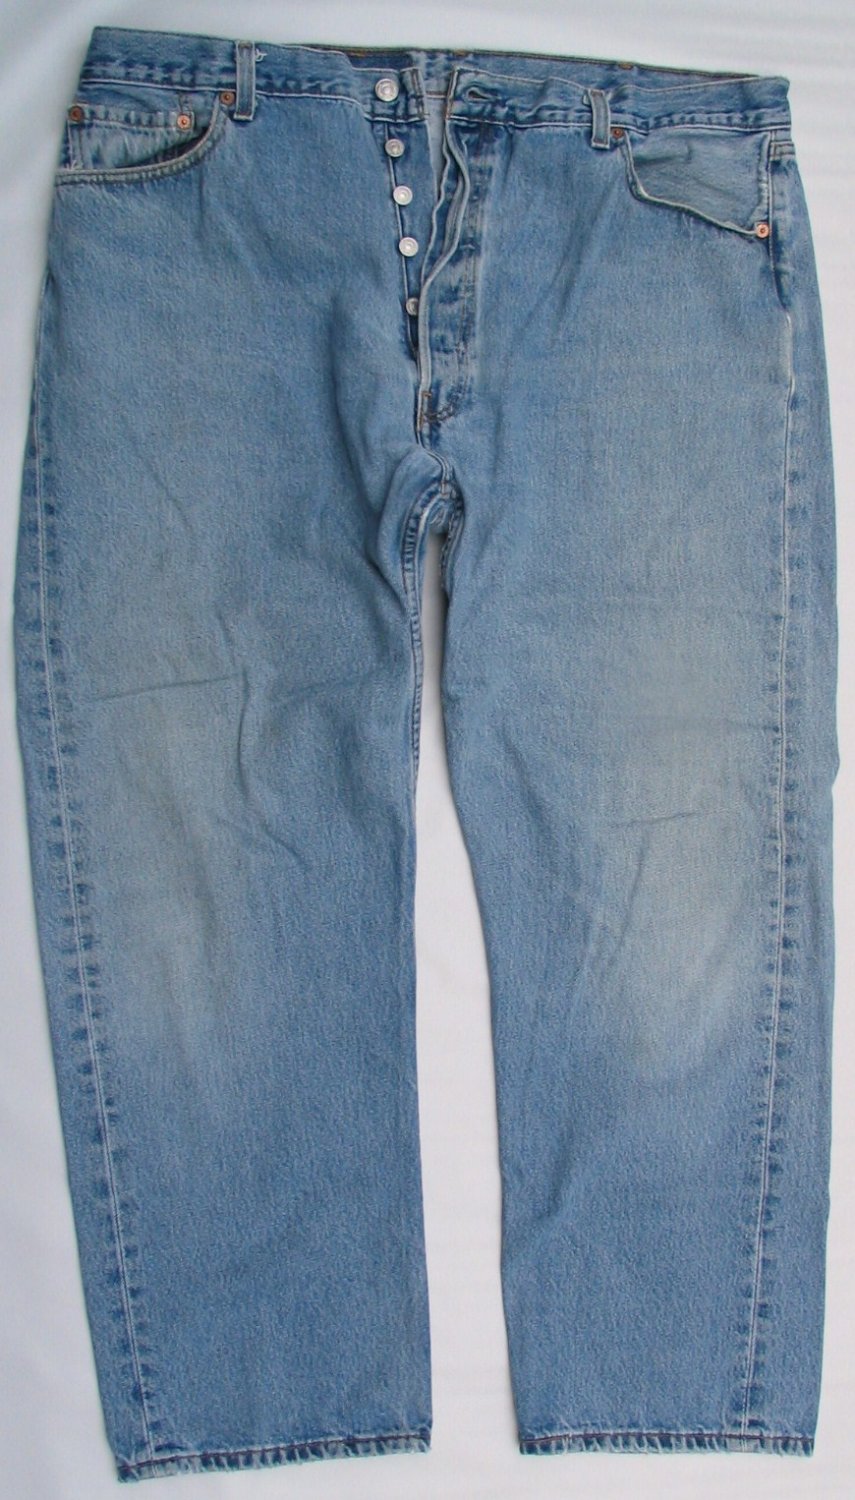 Used Mens Levi 501 Red Tab Button Up Original Jeans 40 x 30